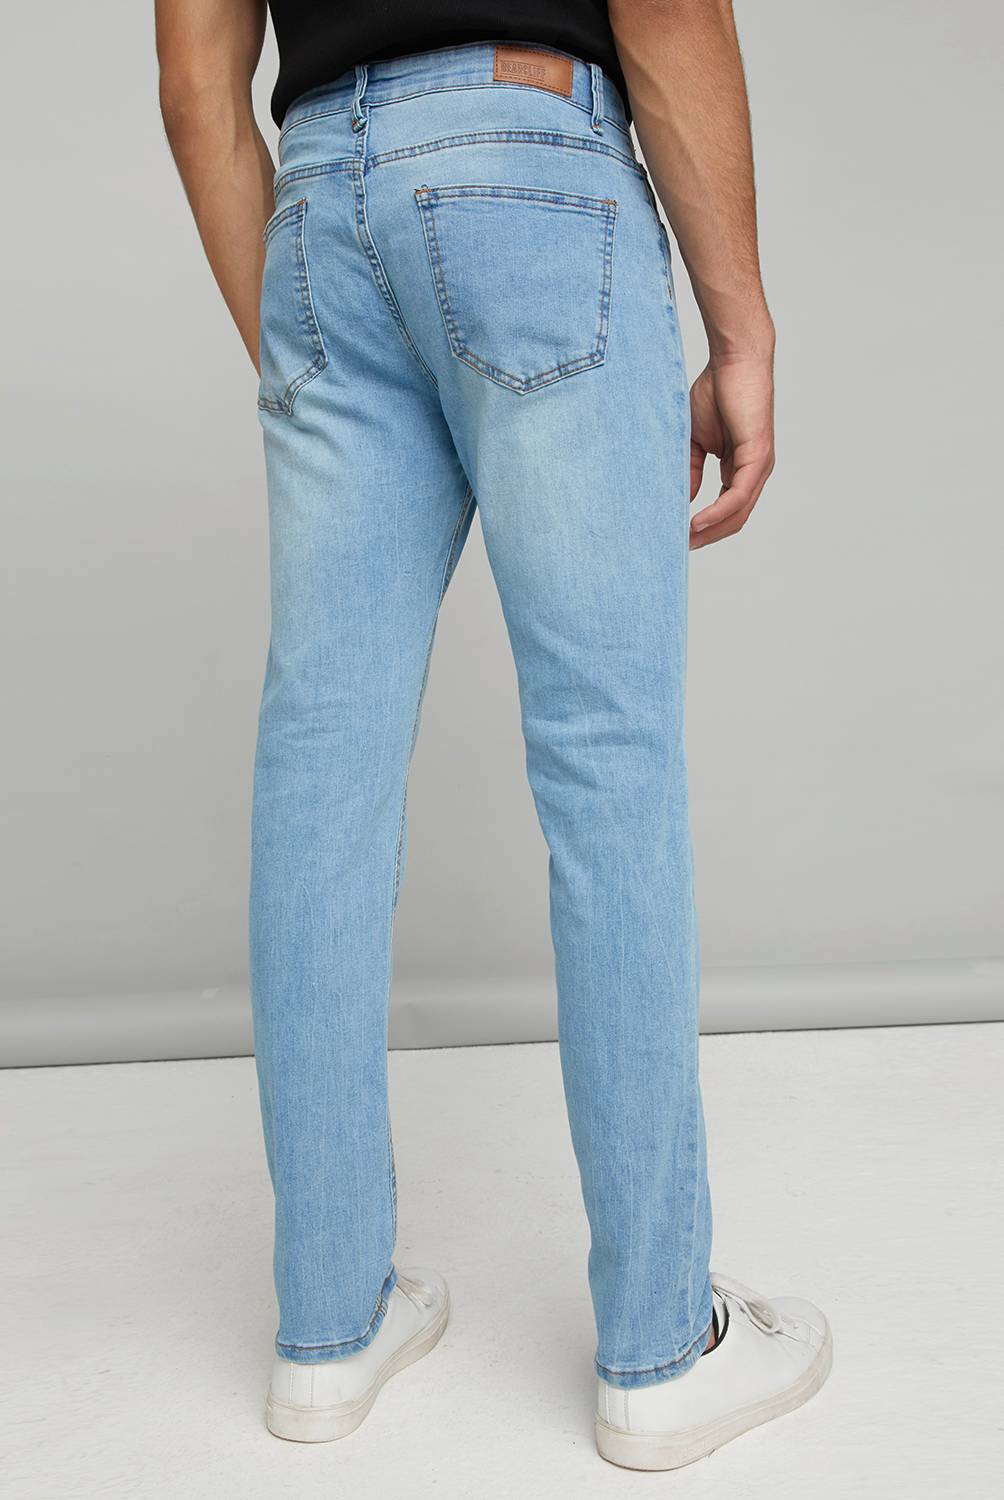 BEARCLIFF - Jeans Skinny Fit Hombre Bearcliff